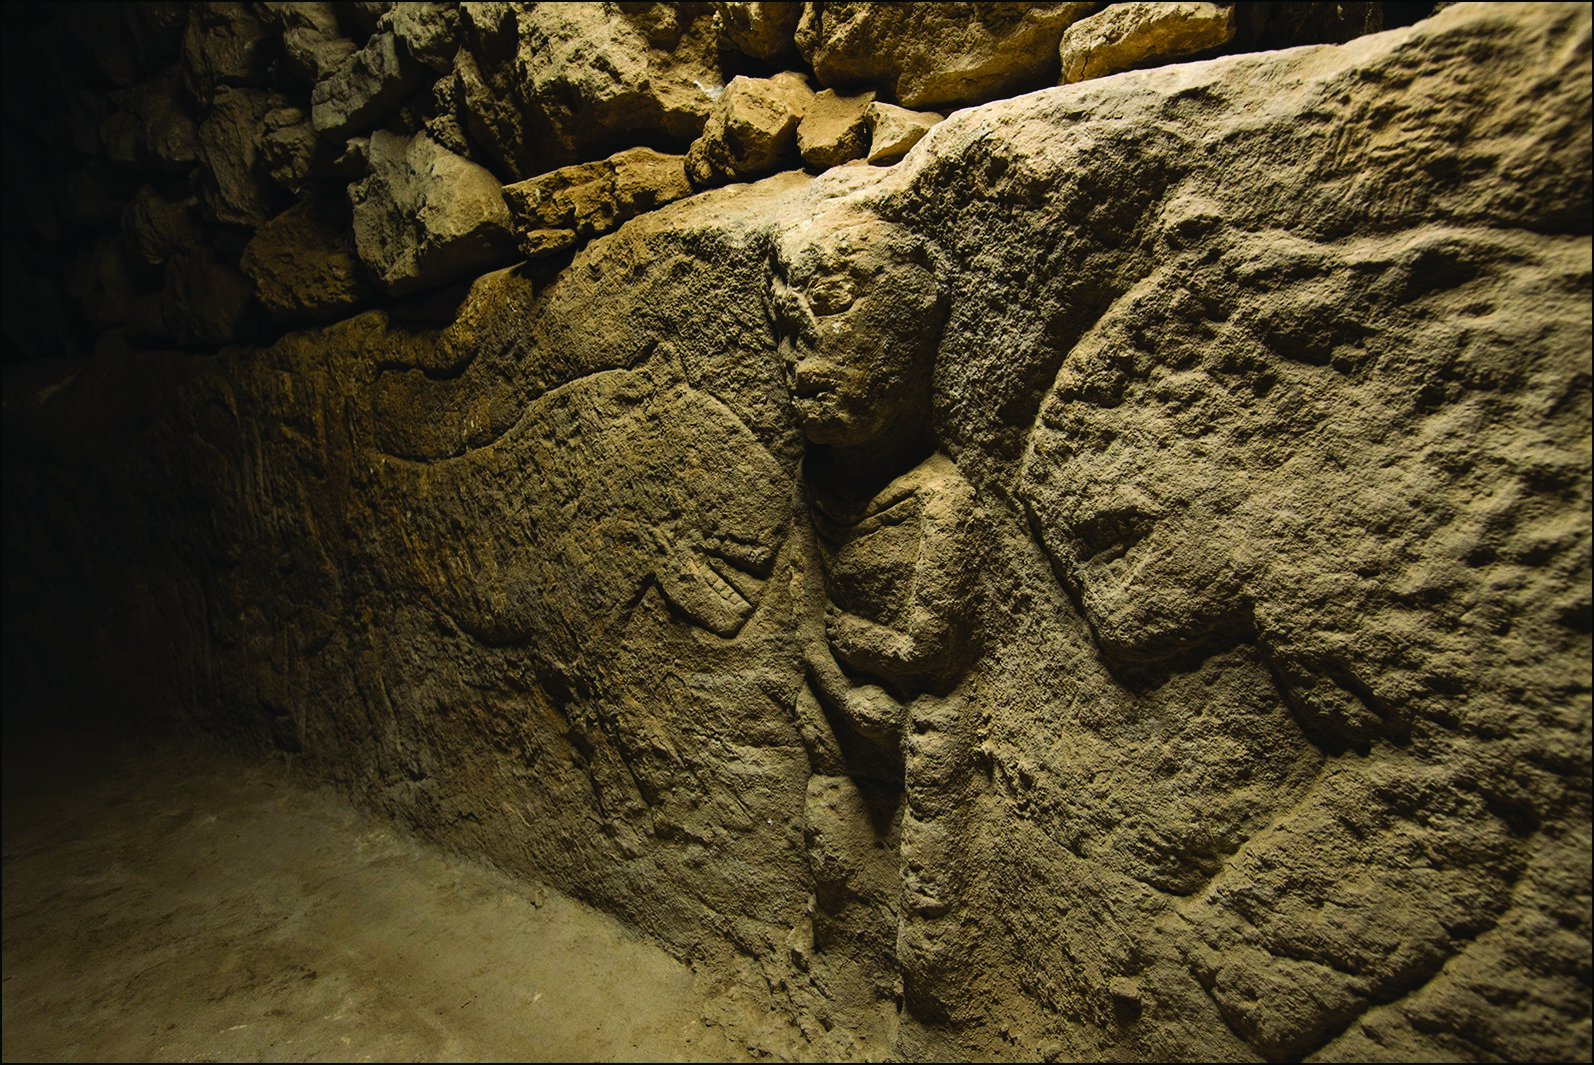 11,000-year-old carving may be earliest narrative scene